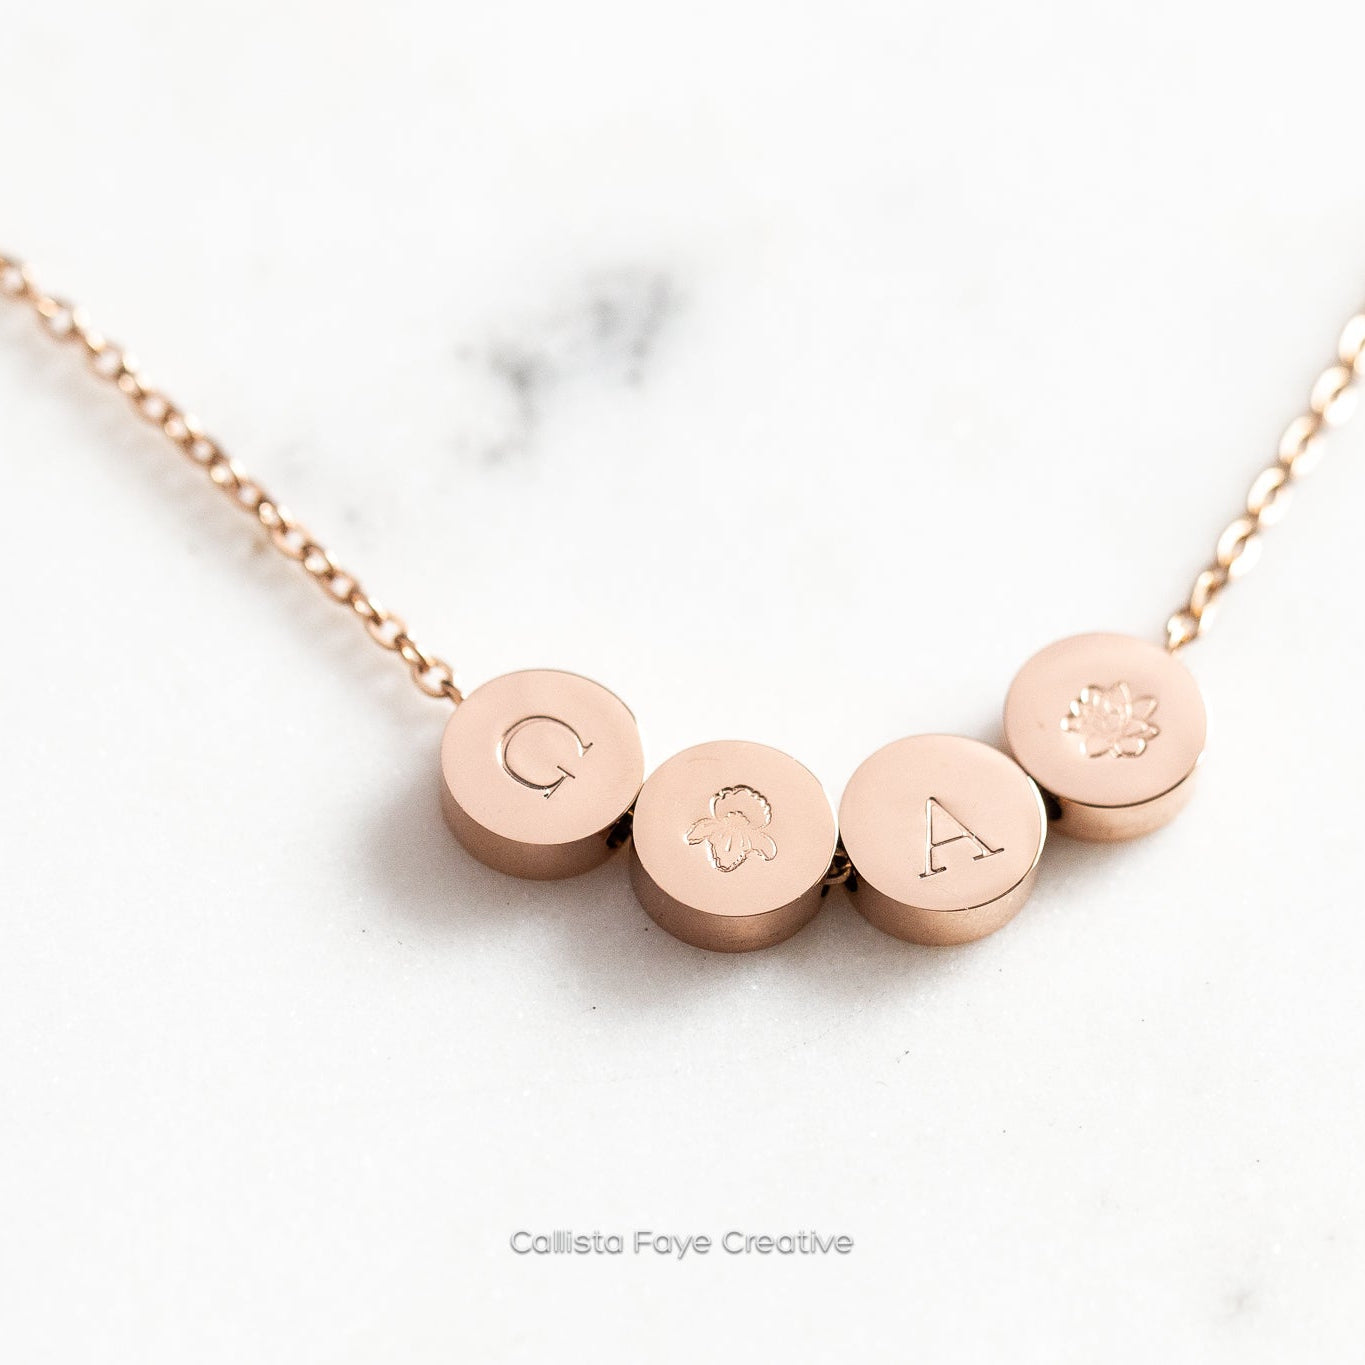 Custom Initial / Birth Flower Mini Coin BEAD Necklace, Personalized Necklaces callistafaye 4 Beads Gold 